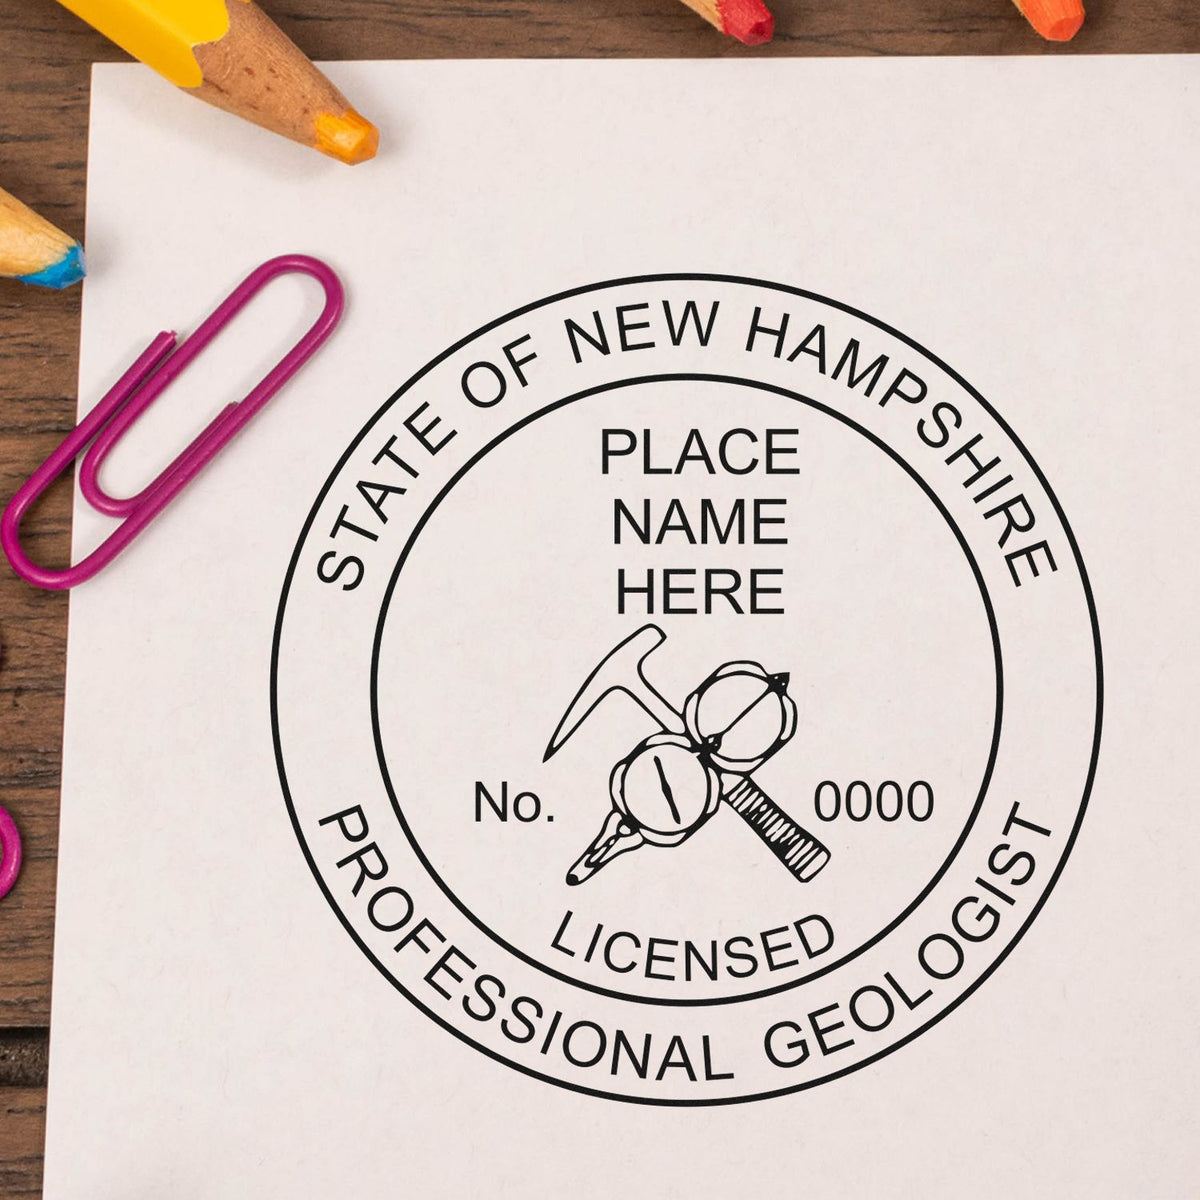 A photograph of the New Hampshire Professional Geologist Seal Stamp stamp impression reveals a vivid, professional image of the on paper.